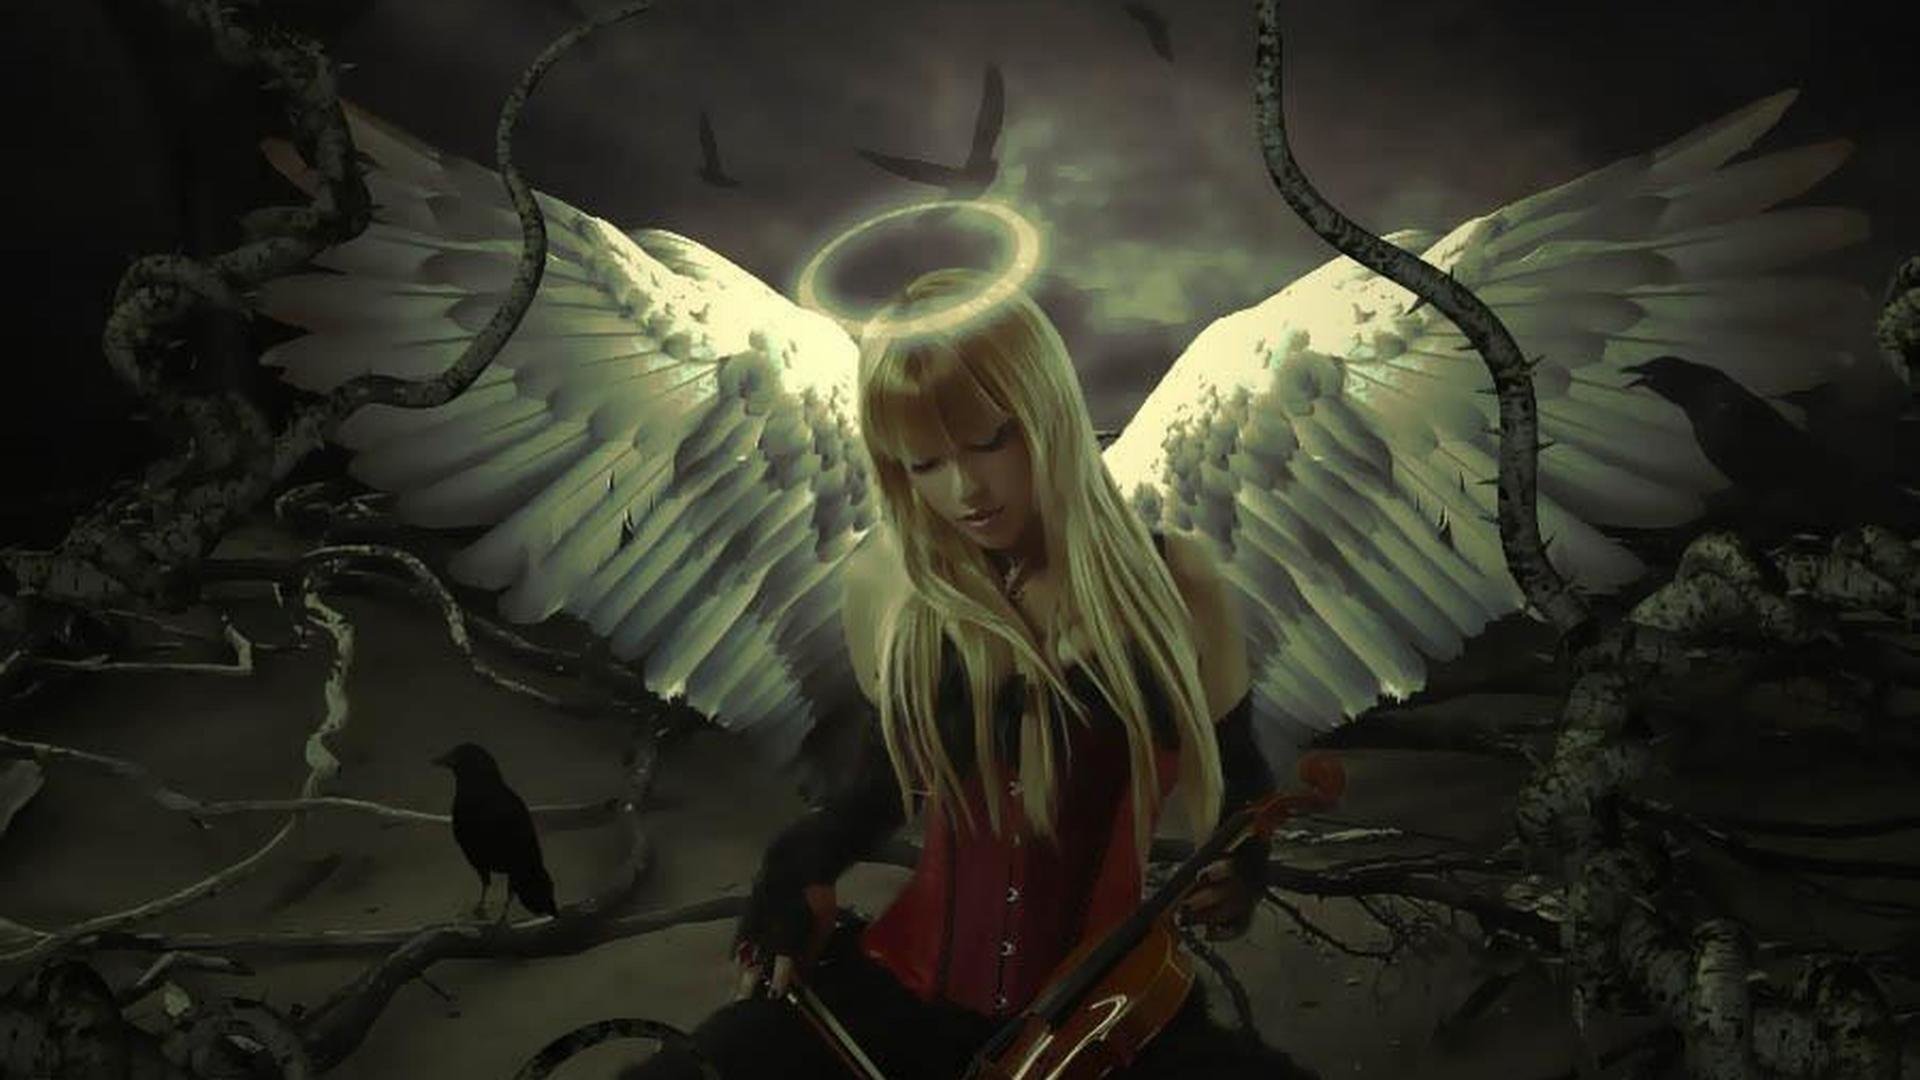 Best Angel wallpaper ID:7159 for High Resolution full hd 1080p computer